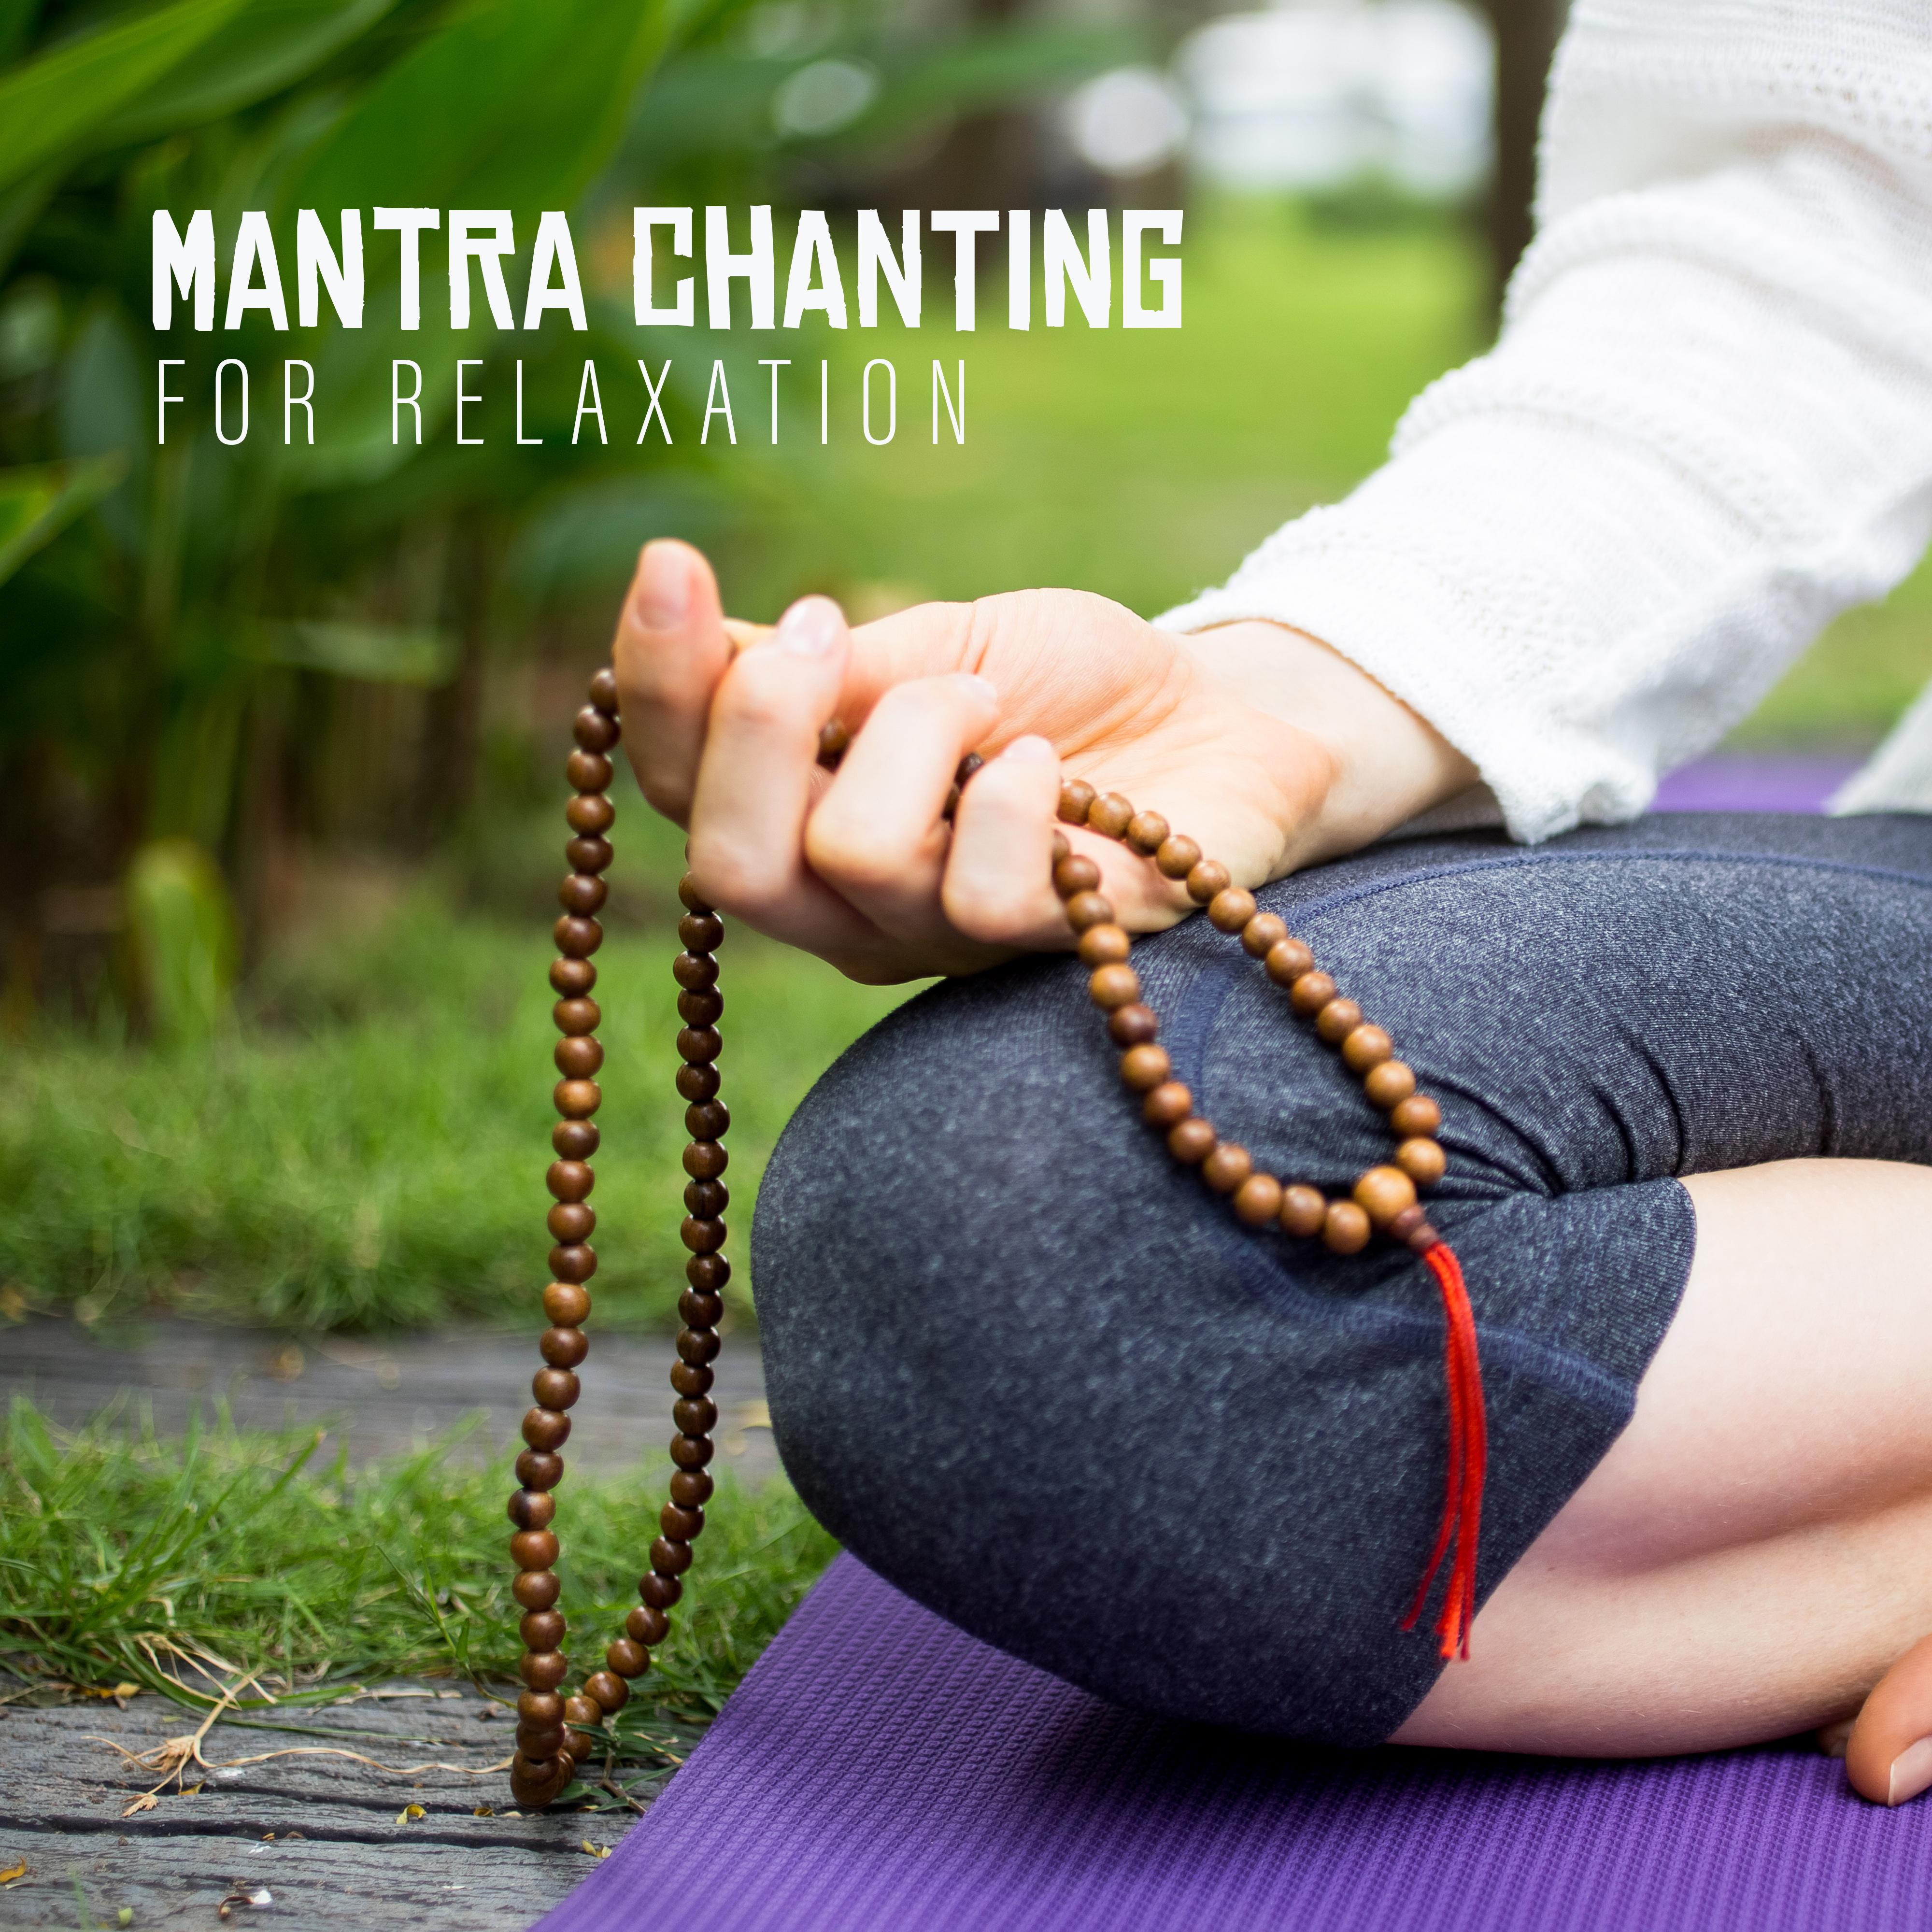 Mantra Chanting for Relaxation